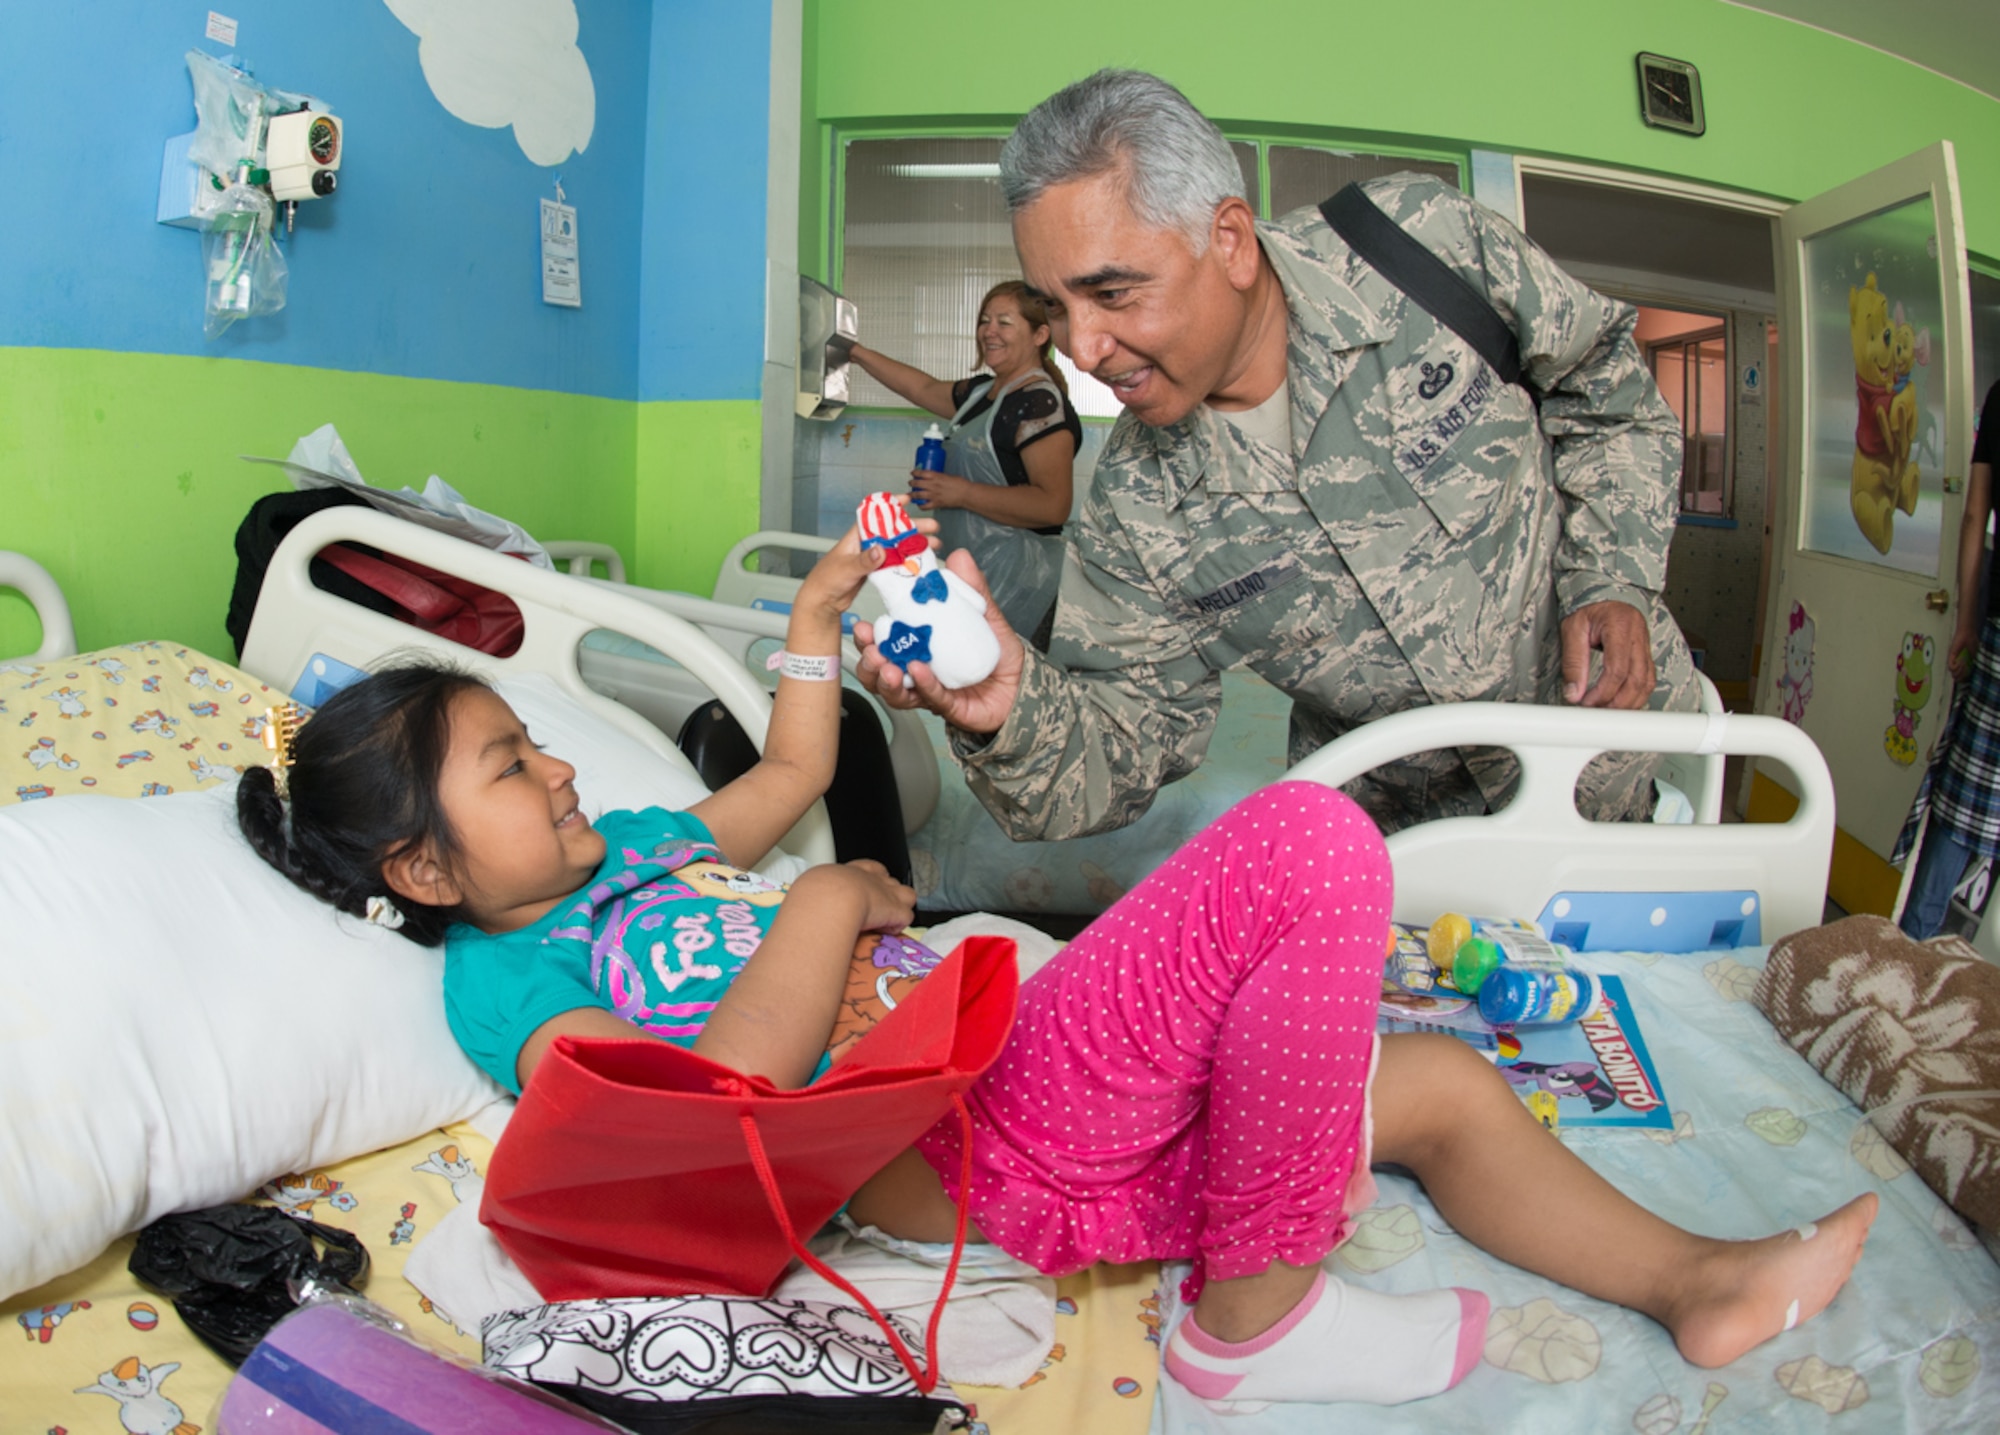 Members from the 149th Fighter Wing of the Texas Air National Guard, along with the other countries participating in Salitre 2014, visit the children’s ward at the Leonardo Guzman Regional Hospital,Oct. 11, 2014, in Antofagasta, Chile, to distribute gifts and bring a few moments of joy to the hospitalized children. Salitre is a Chilean-led exercise where the U.S., Chile, Brazil, Argentina and Uruguay, focus on increasing interoperability between allied nations. (Air National Guard photo/Senior Master Sgt. Elizabeth Gilbert)